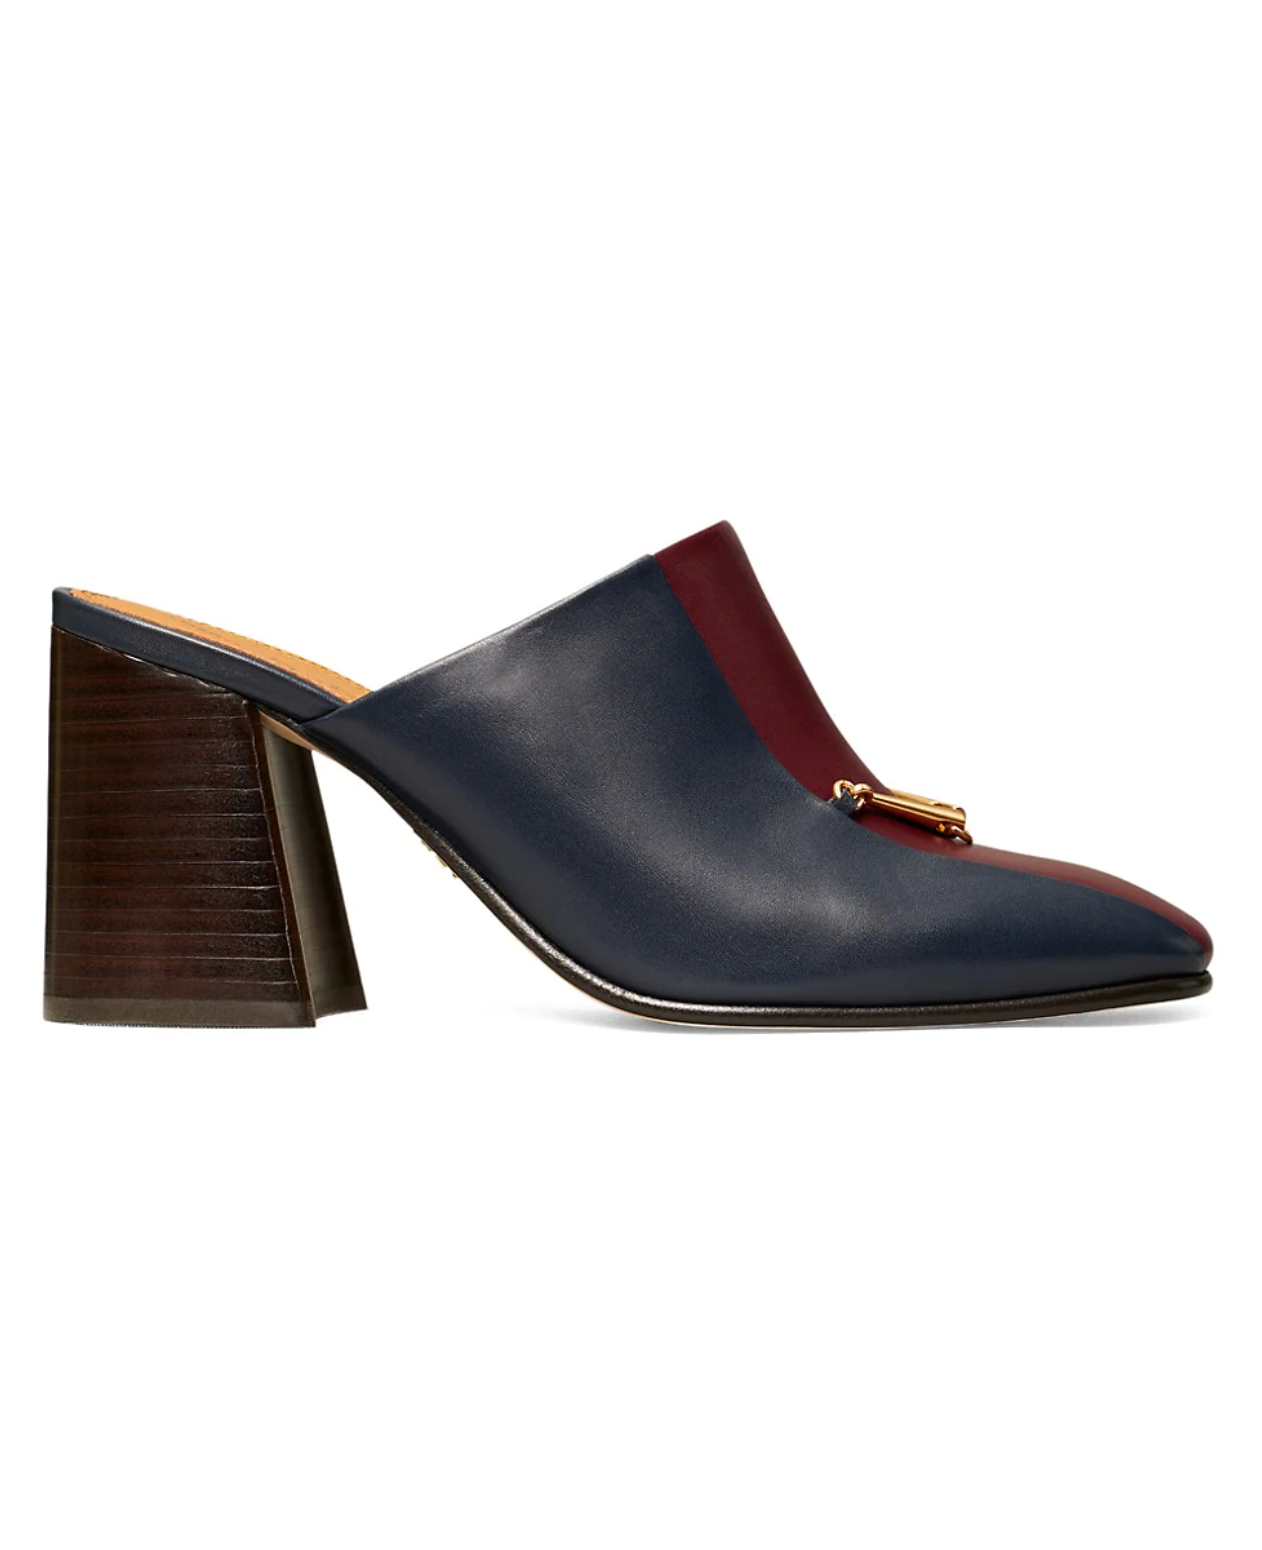 Tory Burch Equestrian Link Square-Toe Colorblock Leather Mules